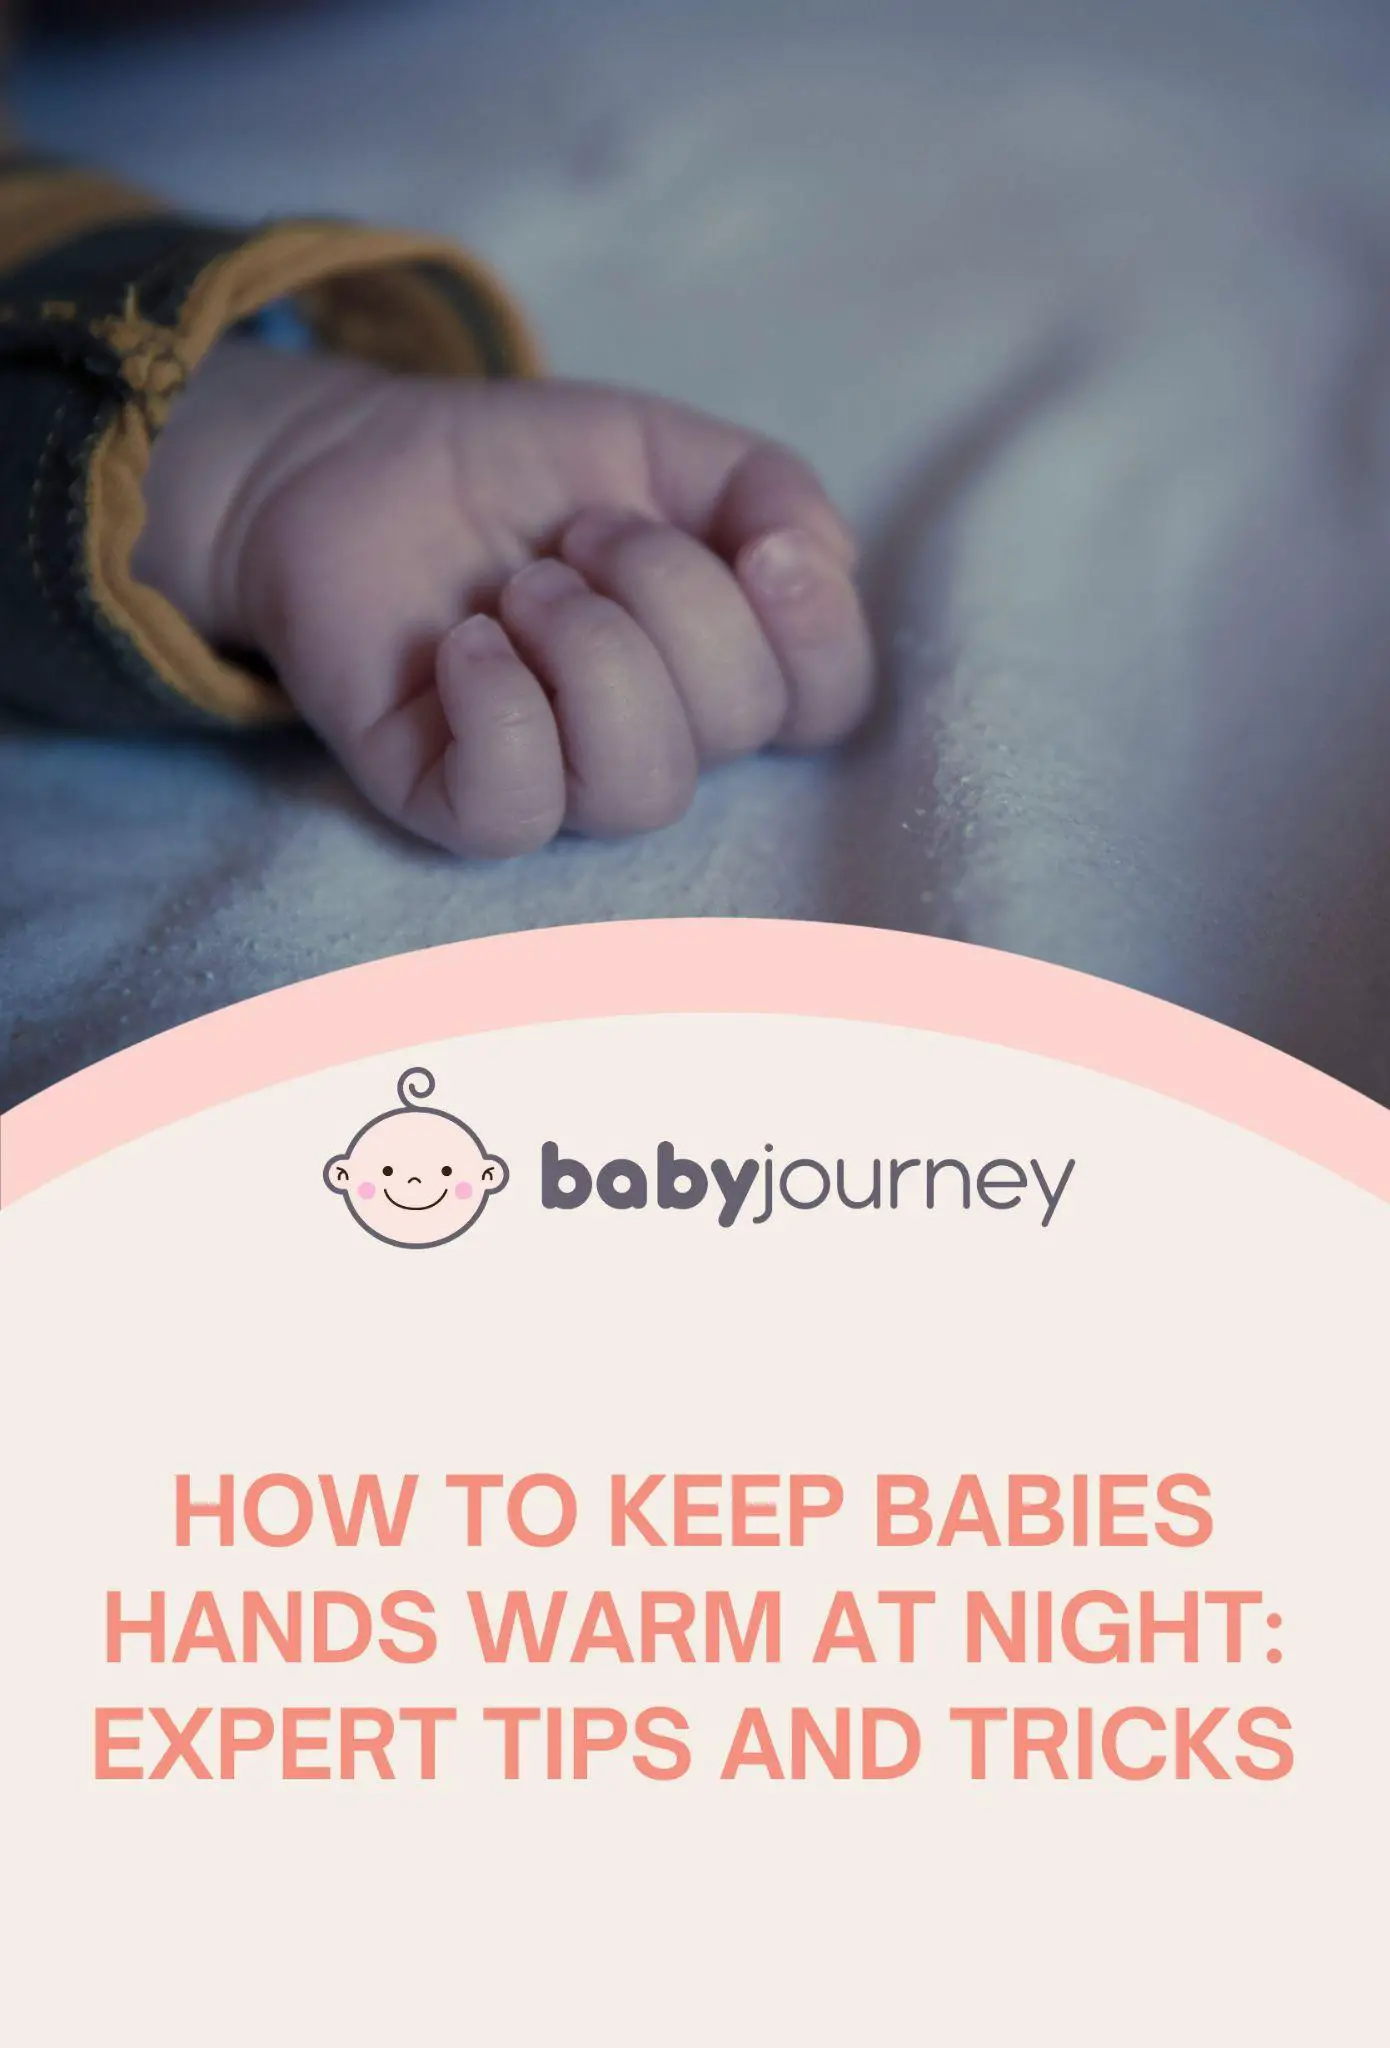 How to Keep Babies Hands Warm at Night Pinterest - Baby Journey